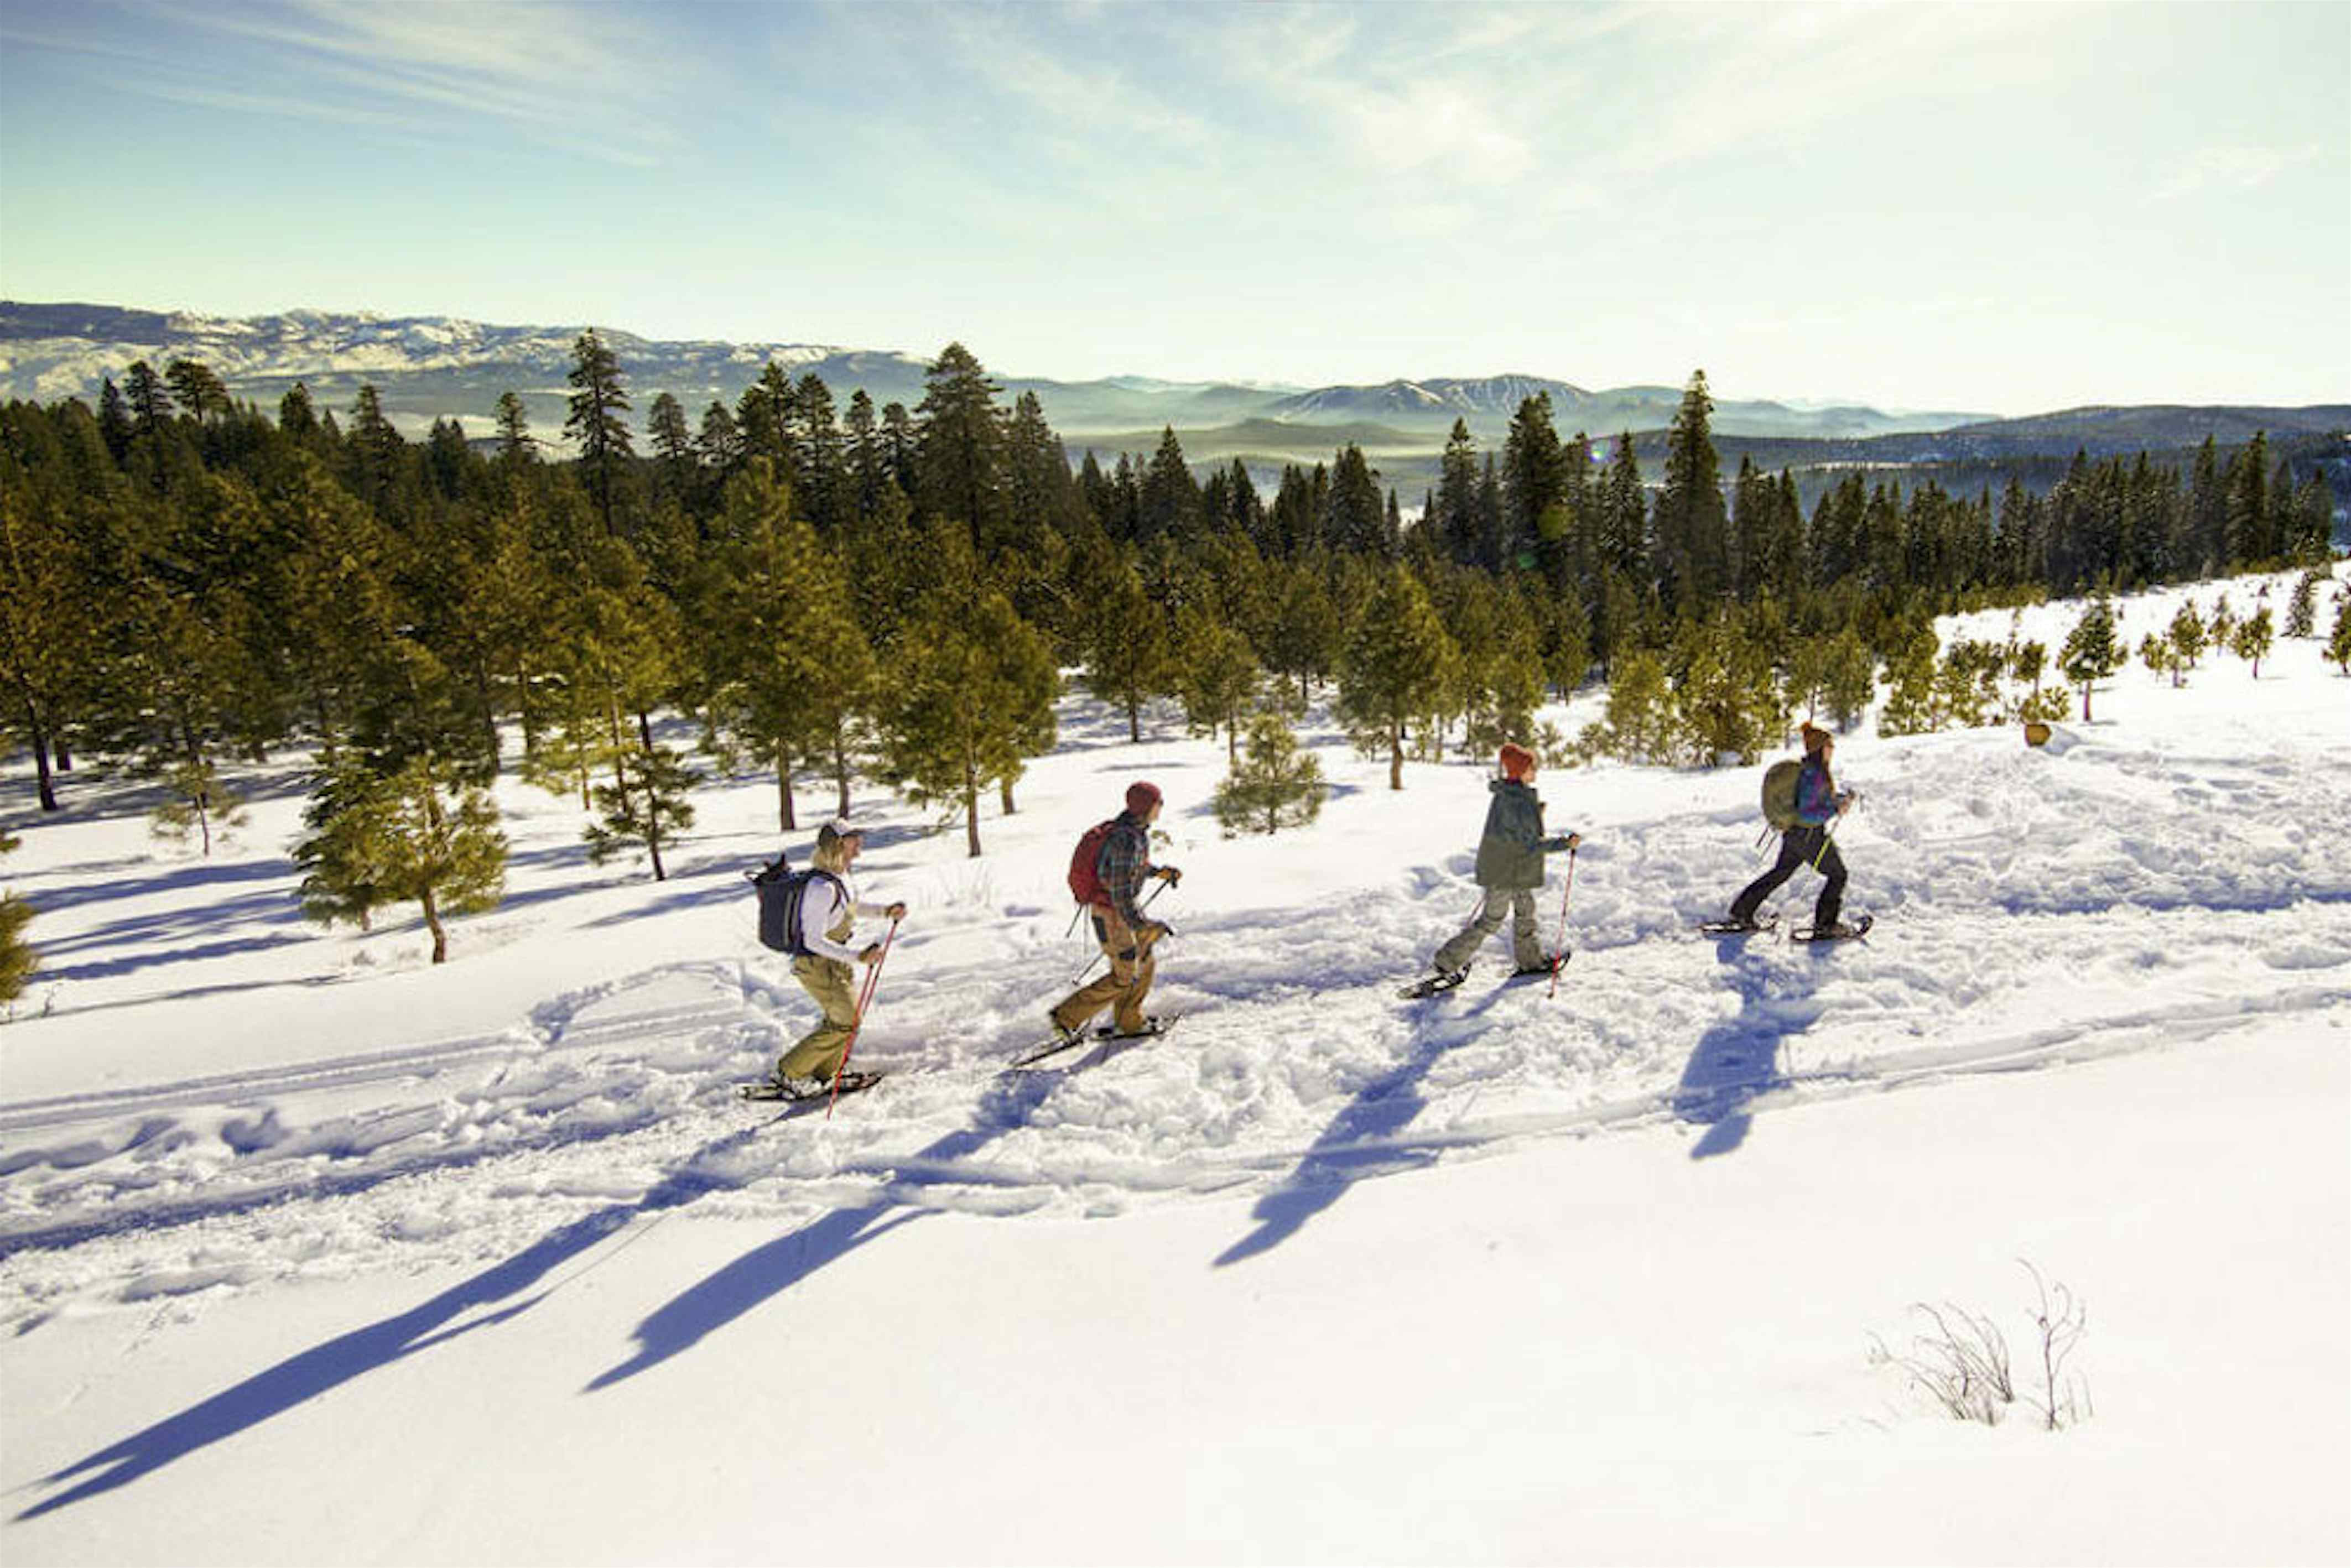 Airbnb has listed all of its best snow experiences for one last winter